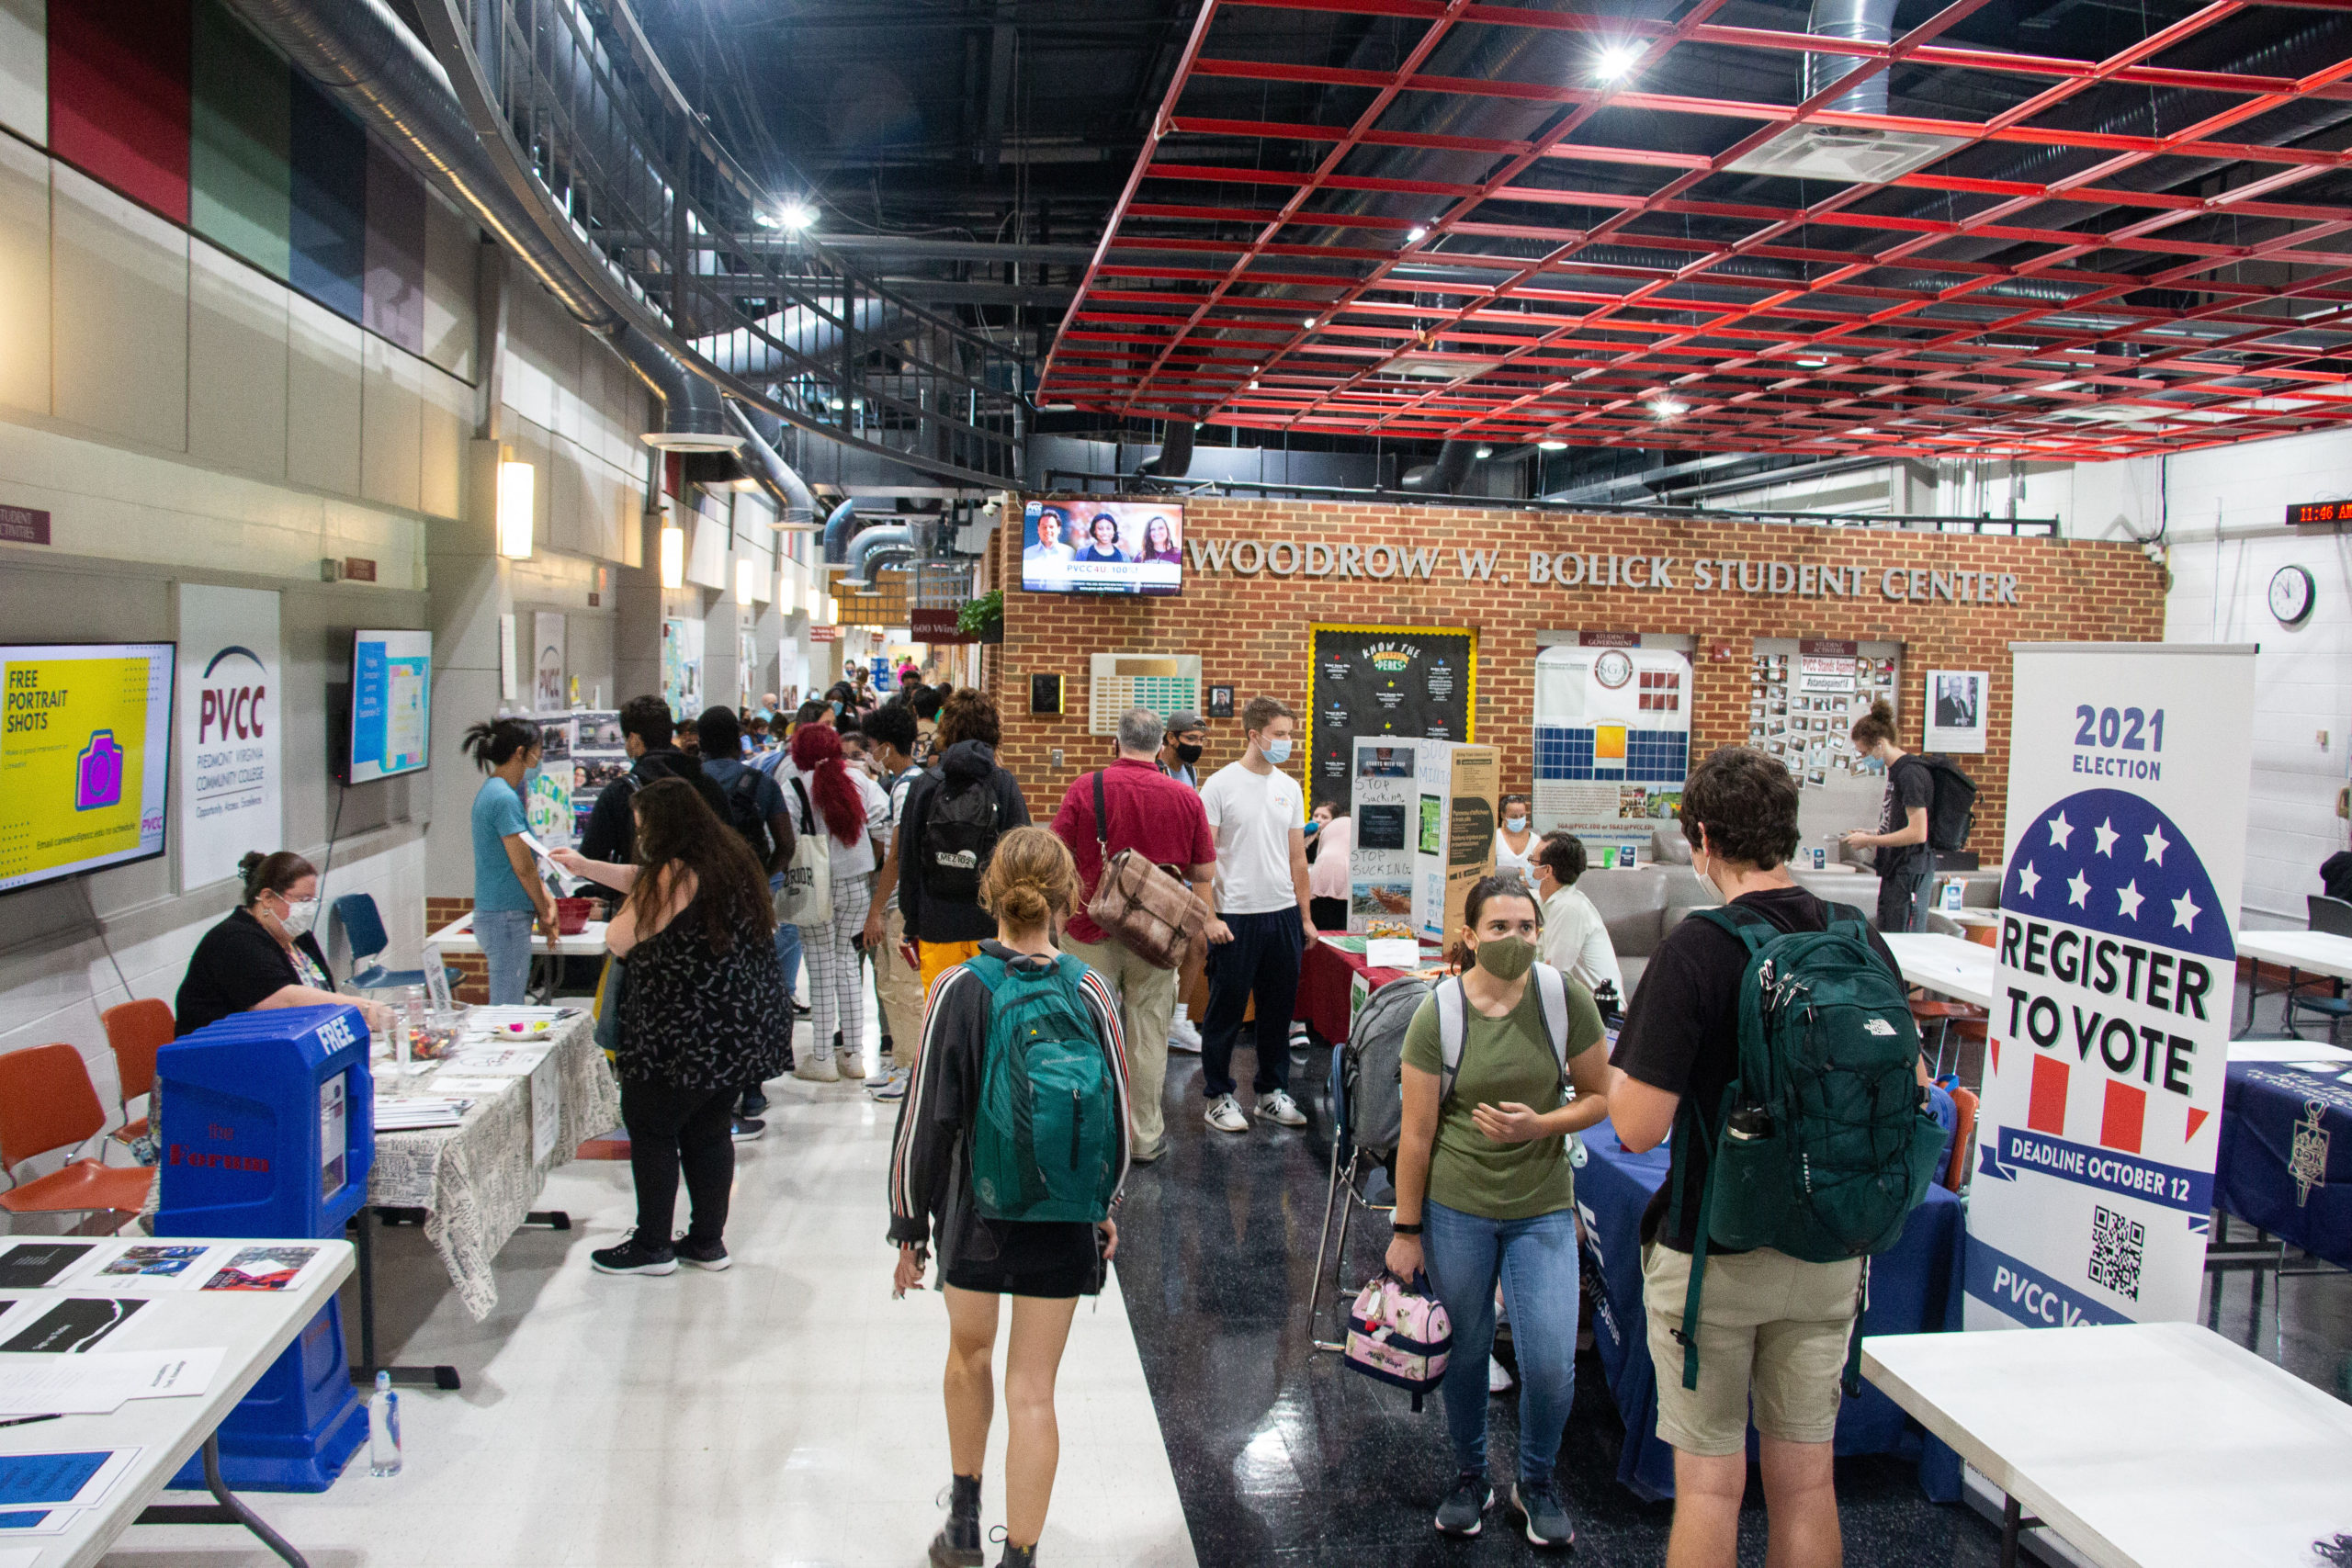 A view of PVCC's main hallway during club day, with numerous students browsing the various club tables